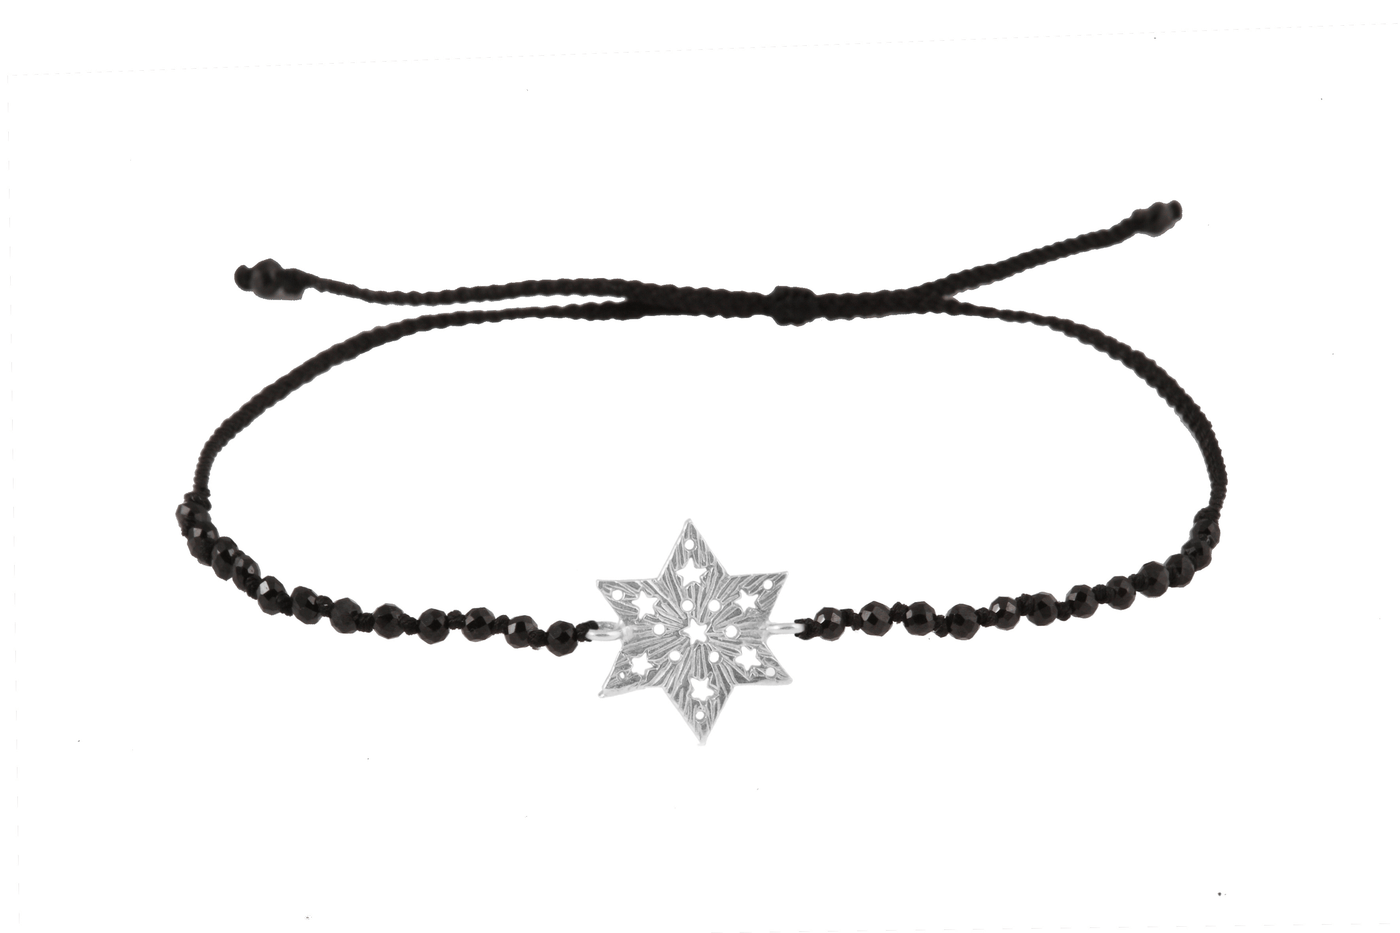 6-pointed star amulet bracelet with beads. Silver